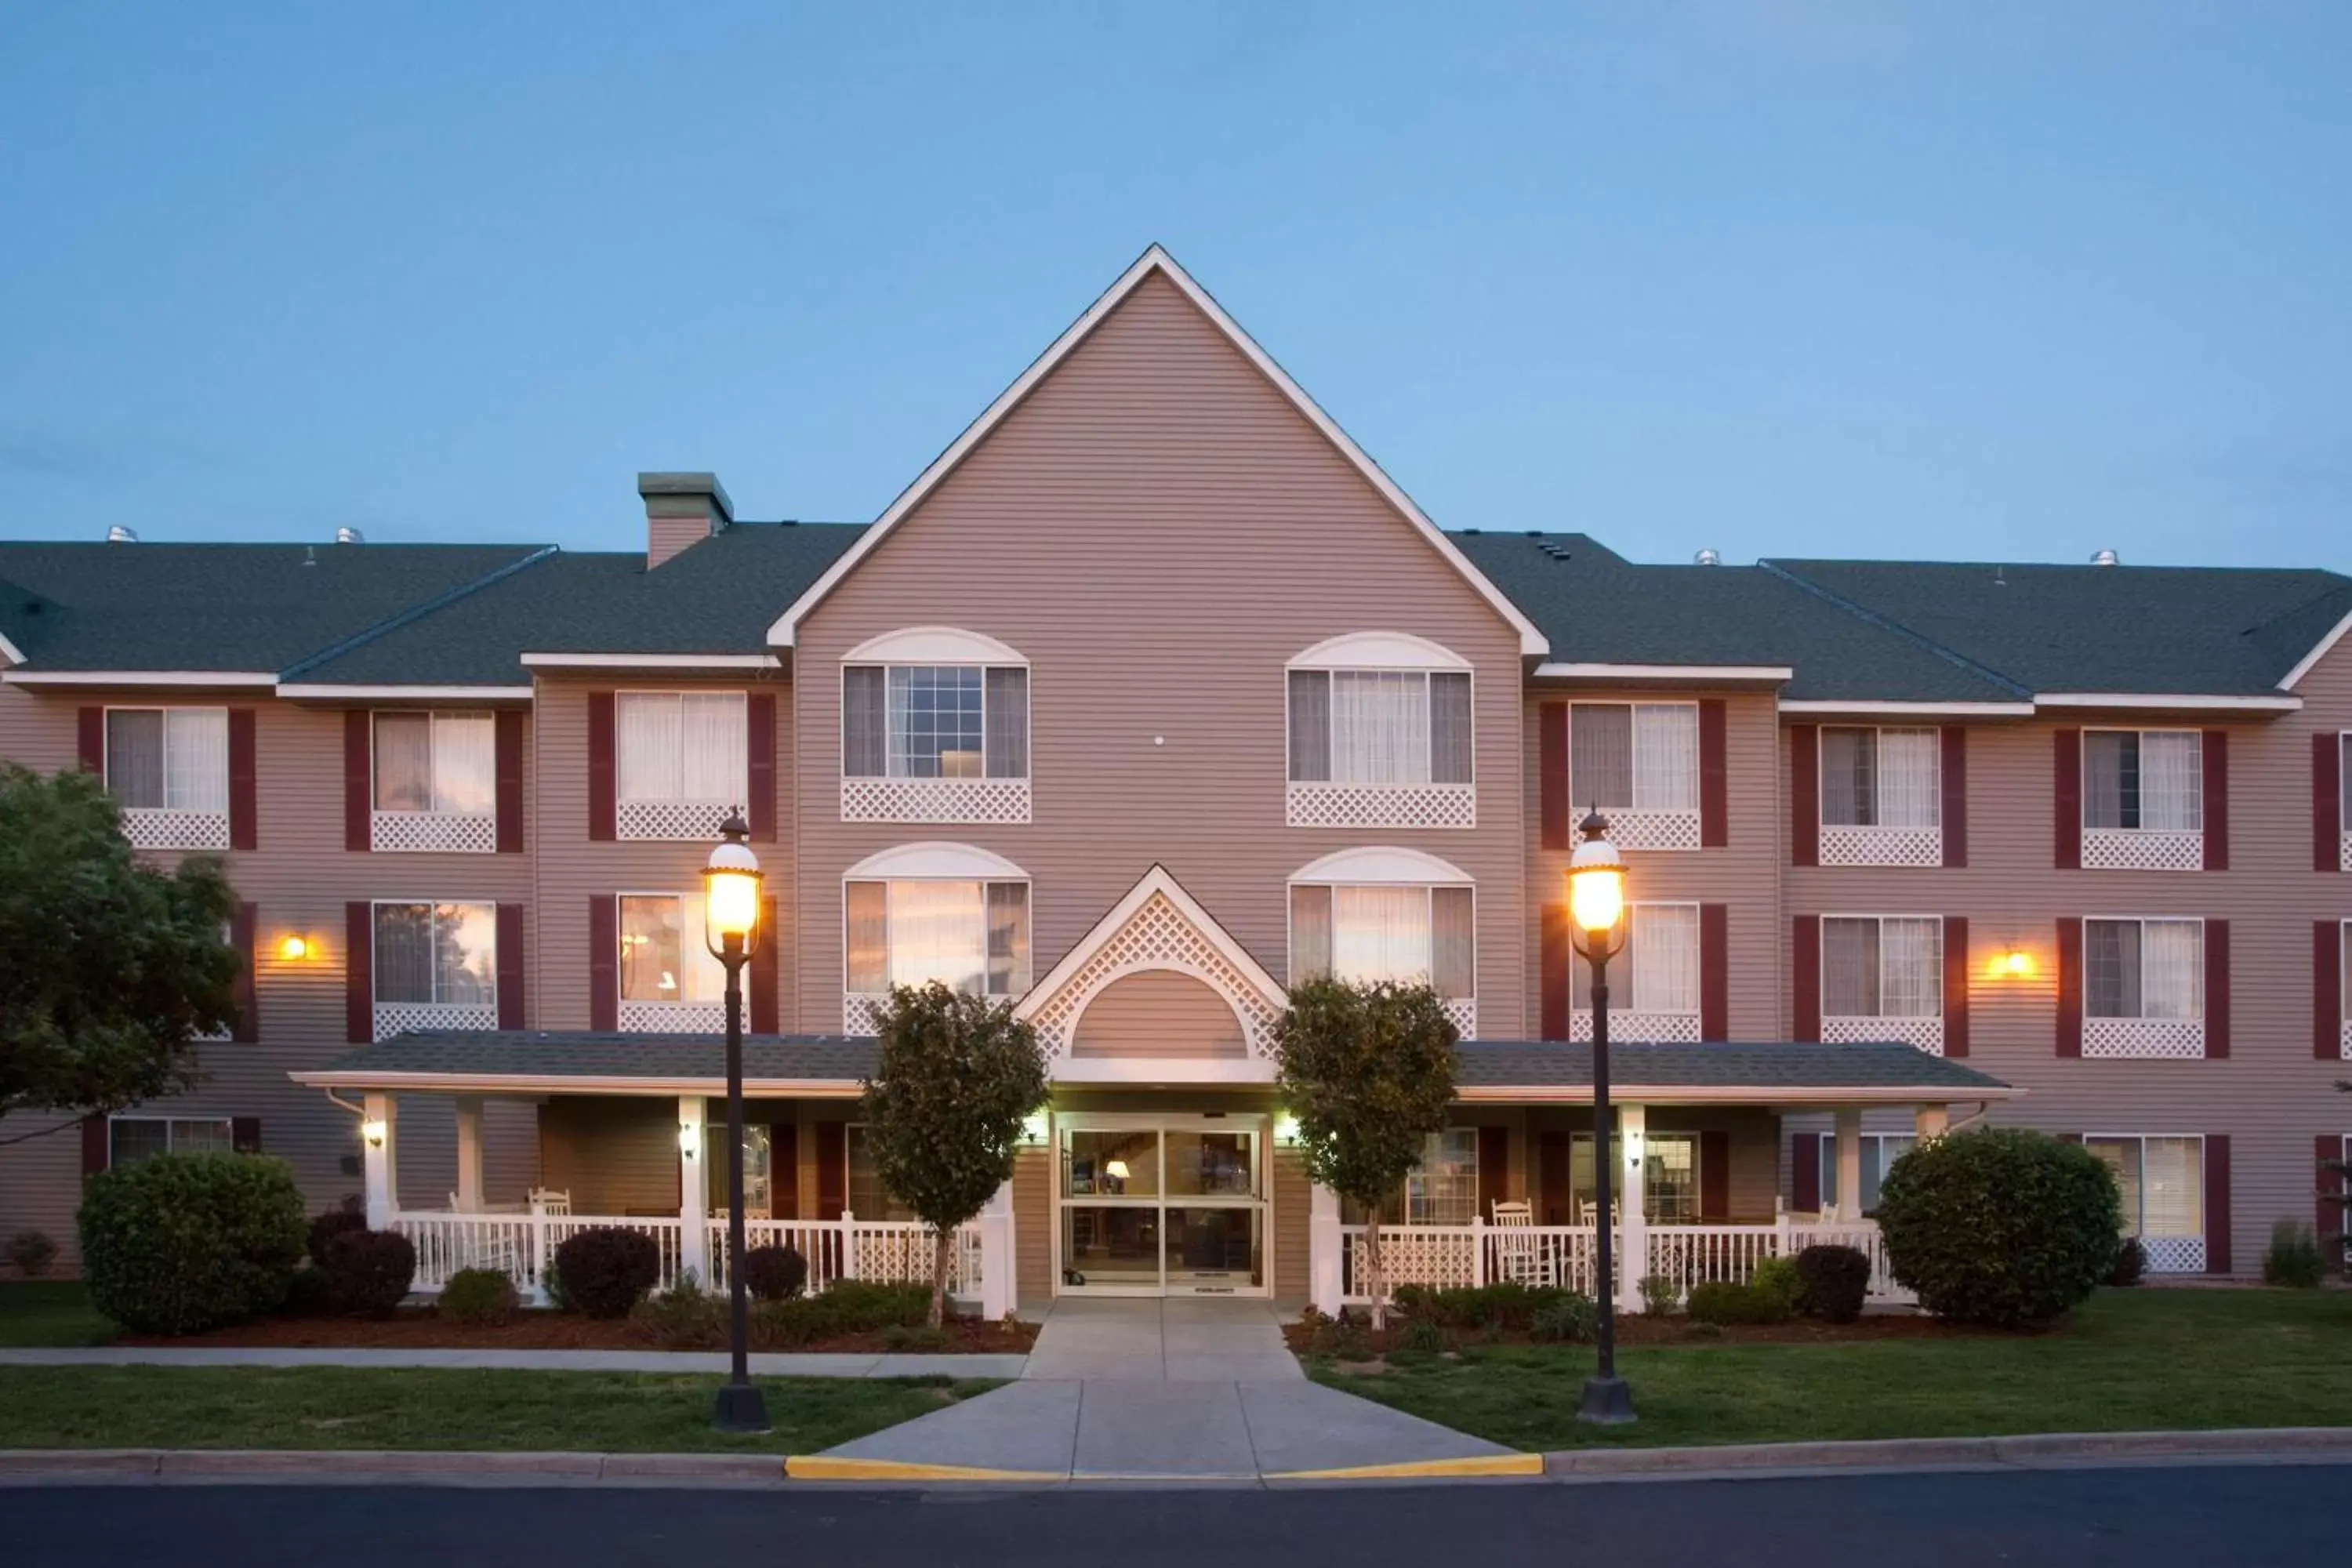 Property Building in Country Inn & Suites by Radisson, Greeley, CO